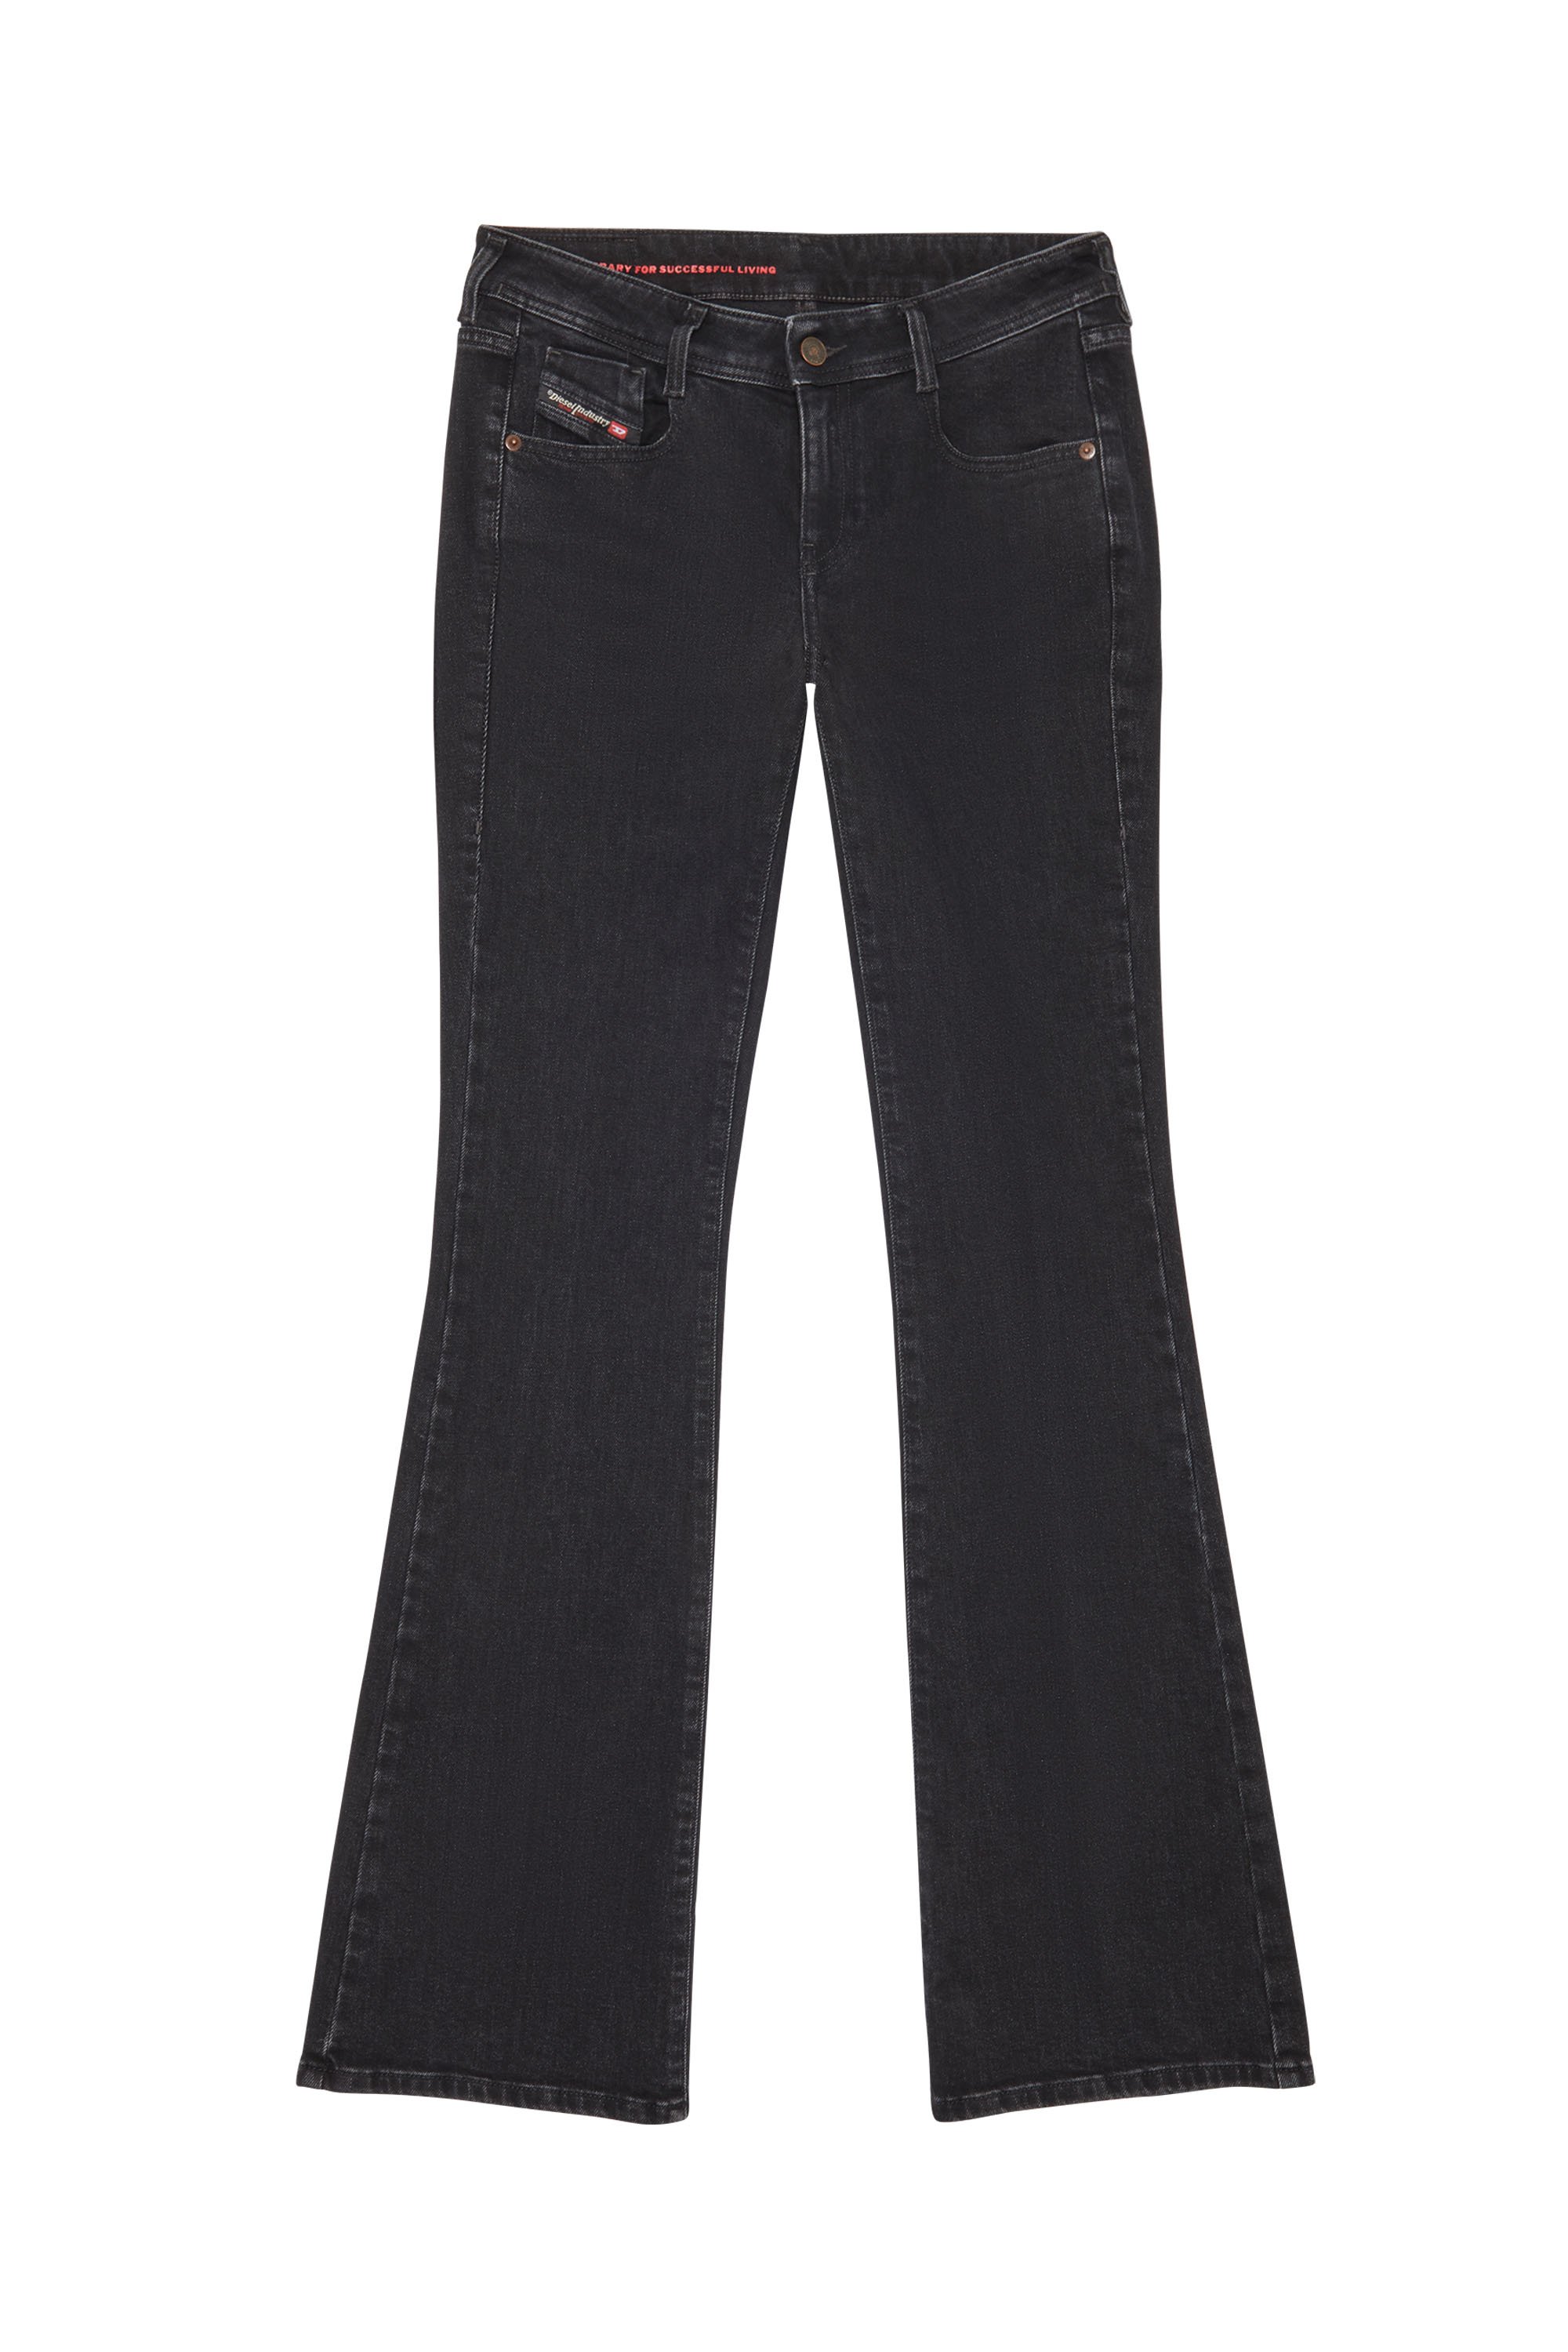 Bootcut and Flare Jeans 1969 D-Ebbey Z9C25, Nero/Grigio scuro - Jeans